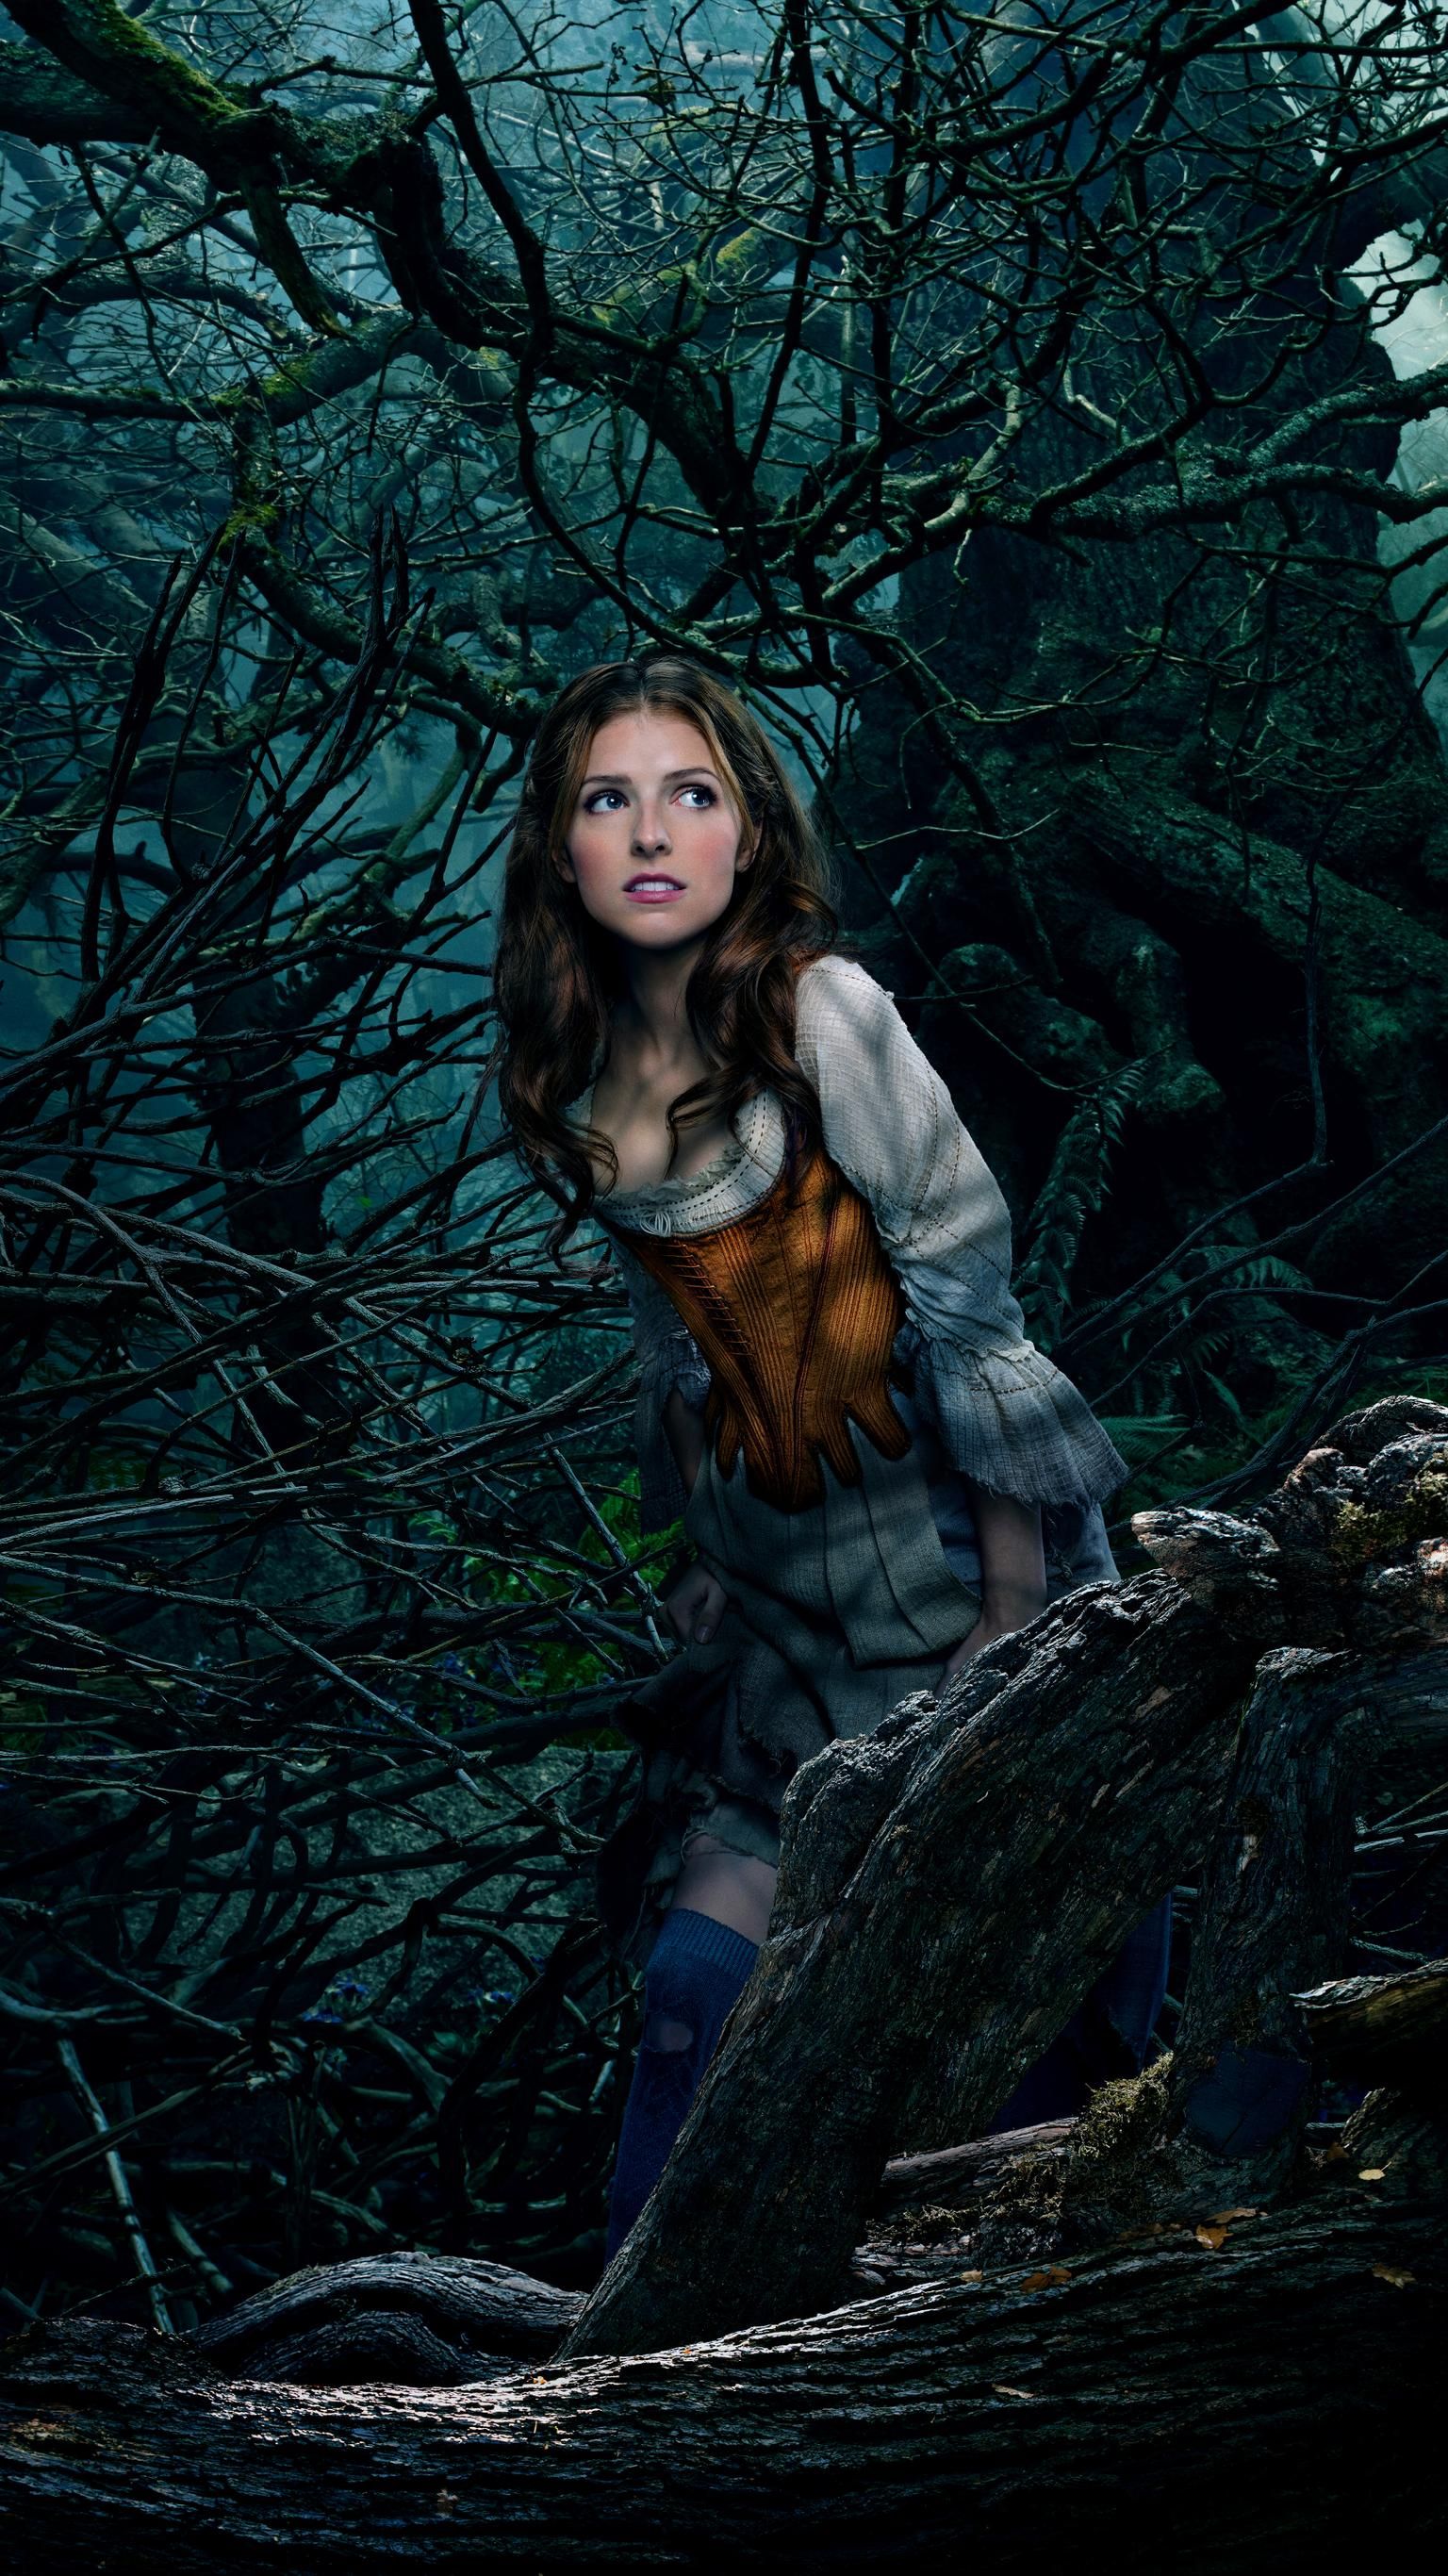 Into the Woods (2014) Phone Wallpaper. Moviemania. Into the woods movie, Anna kendrick, Disney live action movies